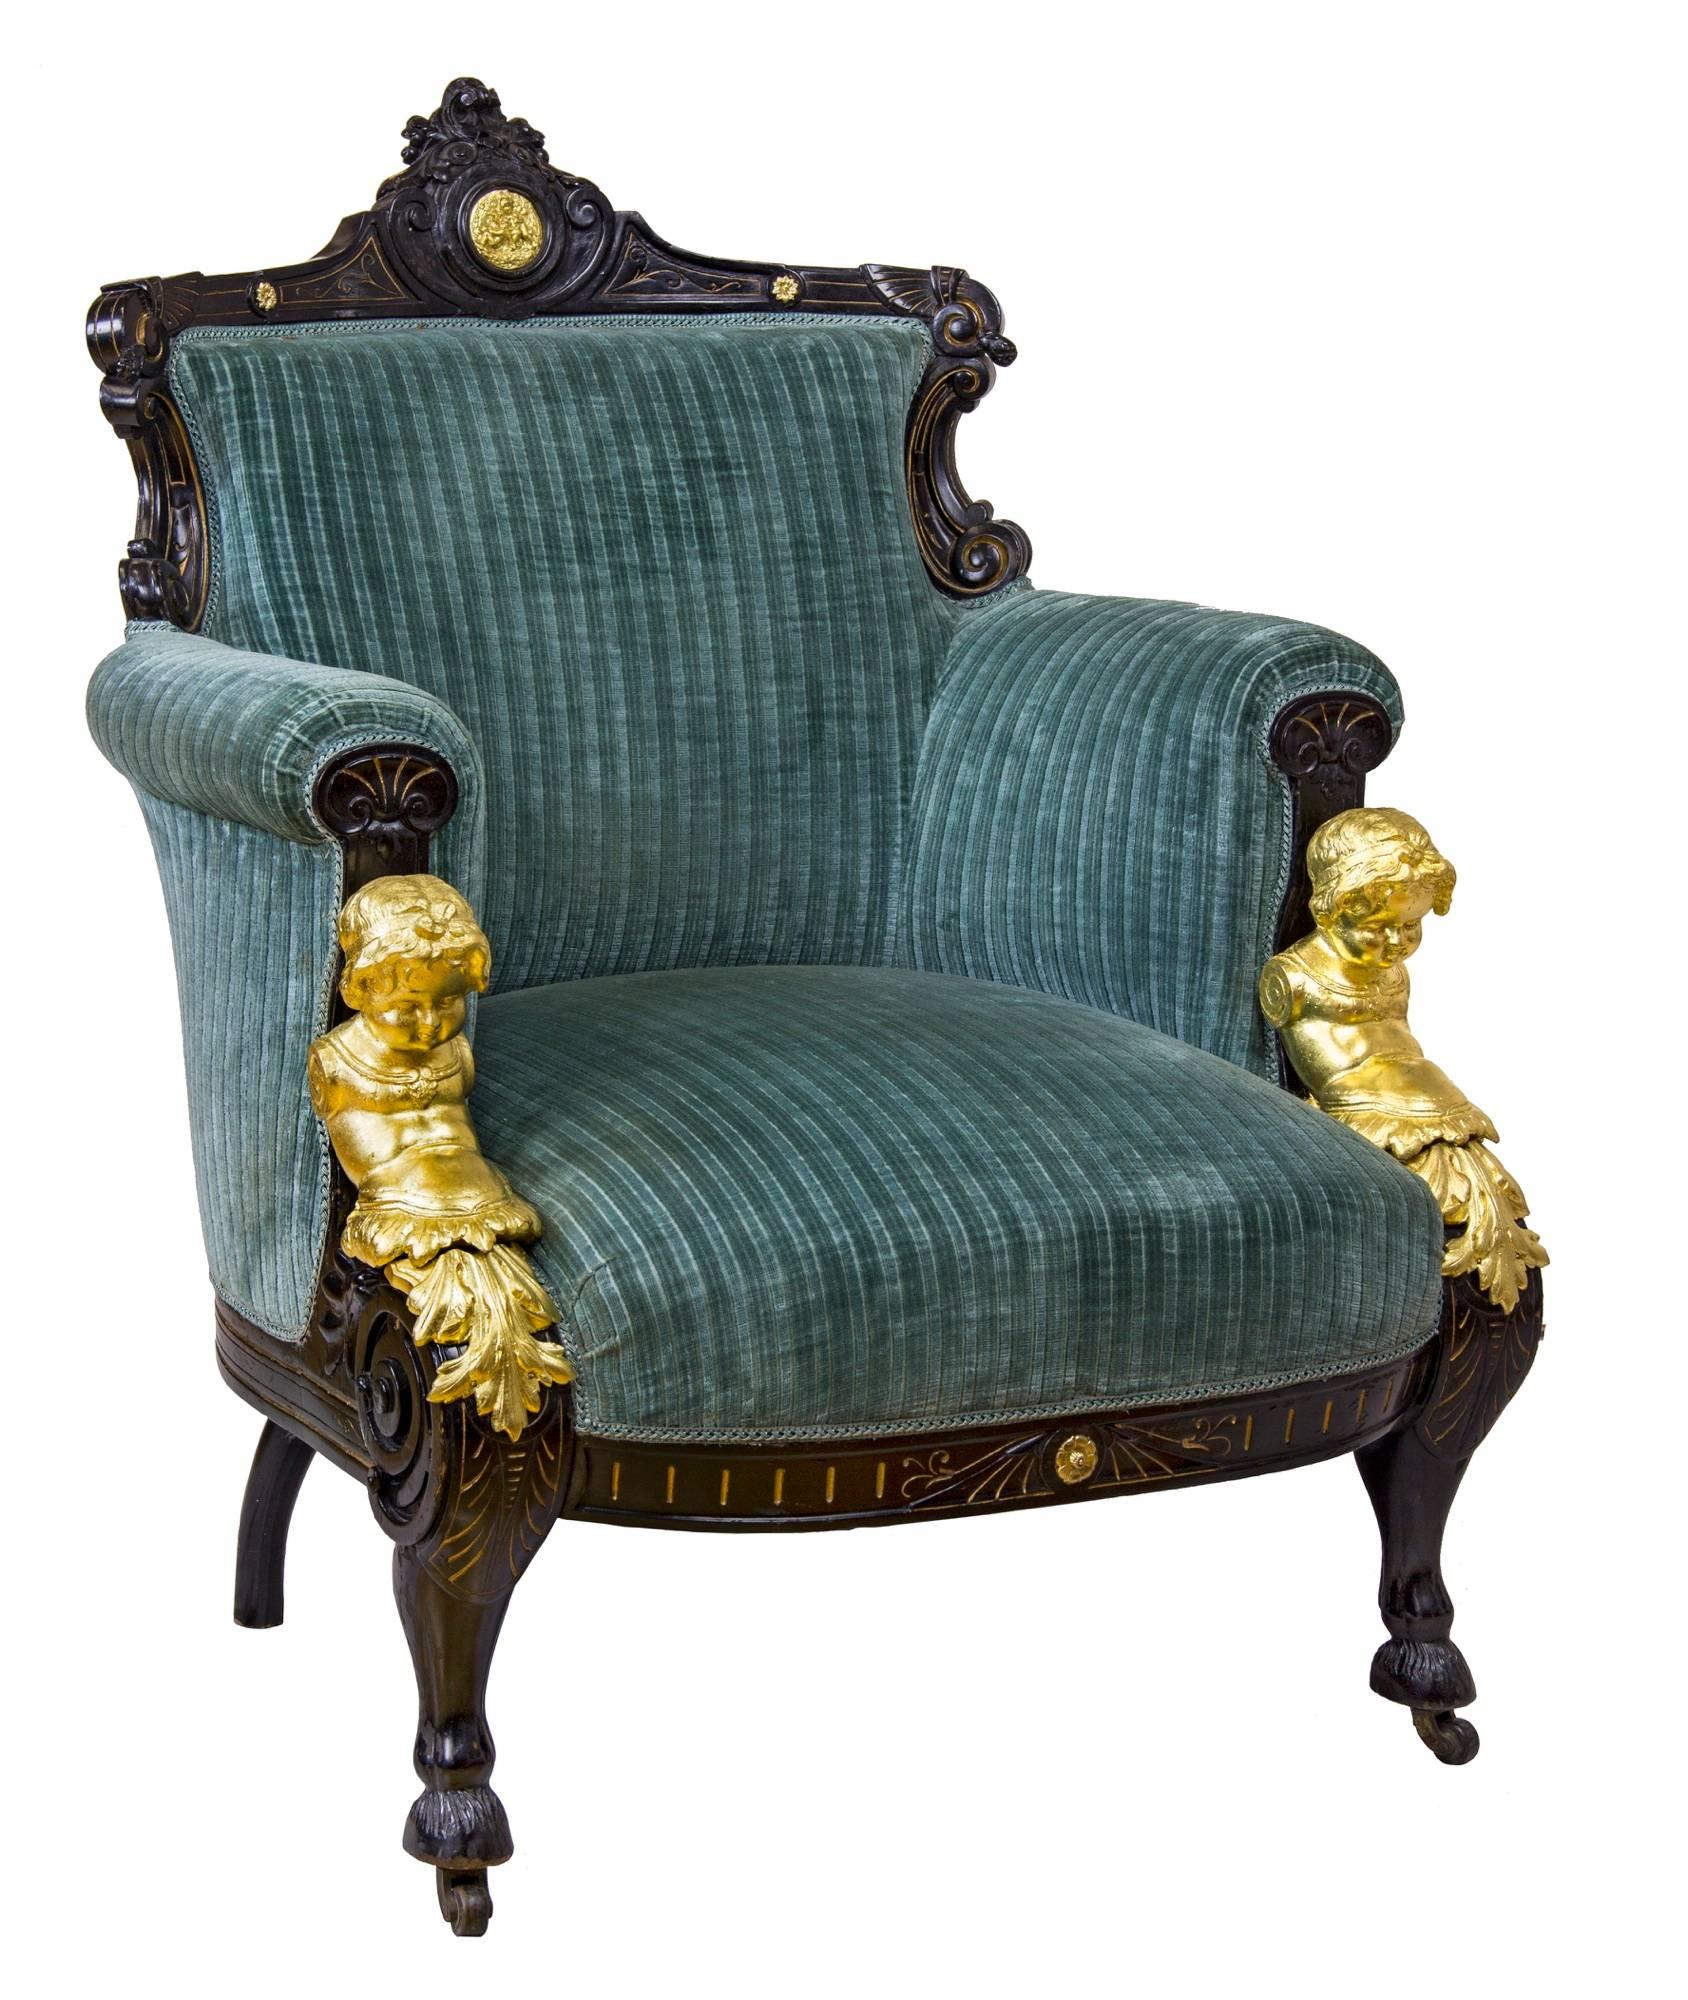 During the second and third quarters of the 19th century, New York City emerged as the centre for the production of the finest furniture for interior woodwork and decoration internationally. Their commissions for the production of the finest came